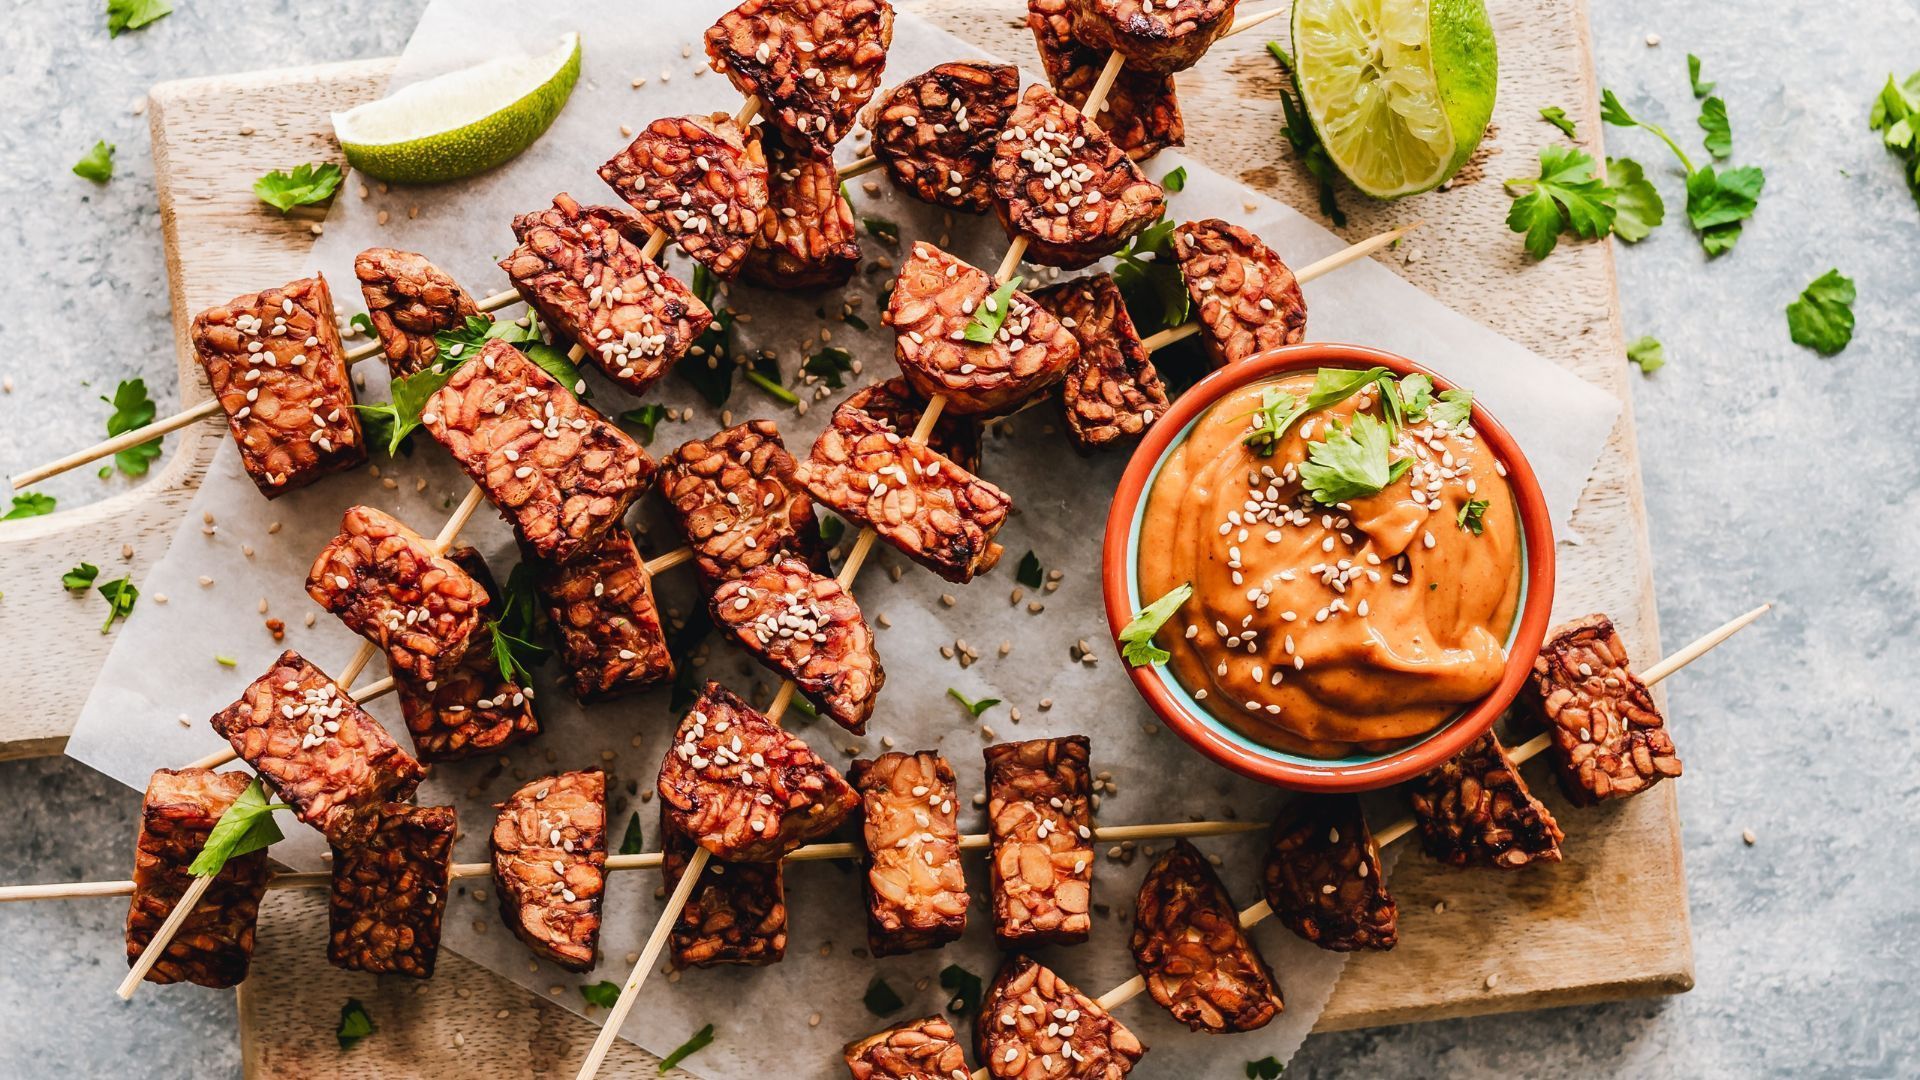 A guide to tempeh, a plant-based protein that's healthy, tasty, and nutritious